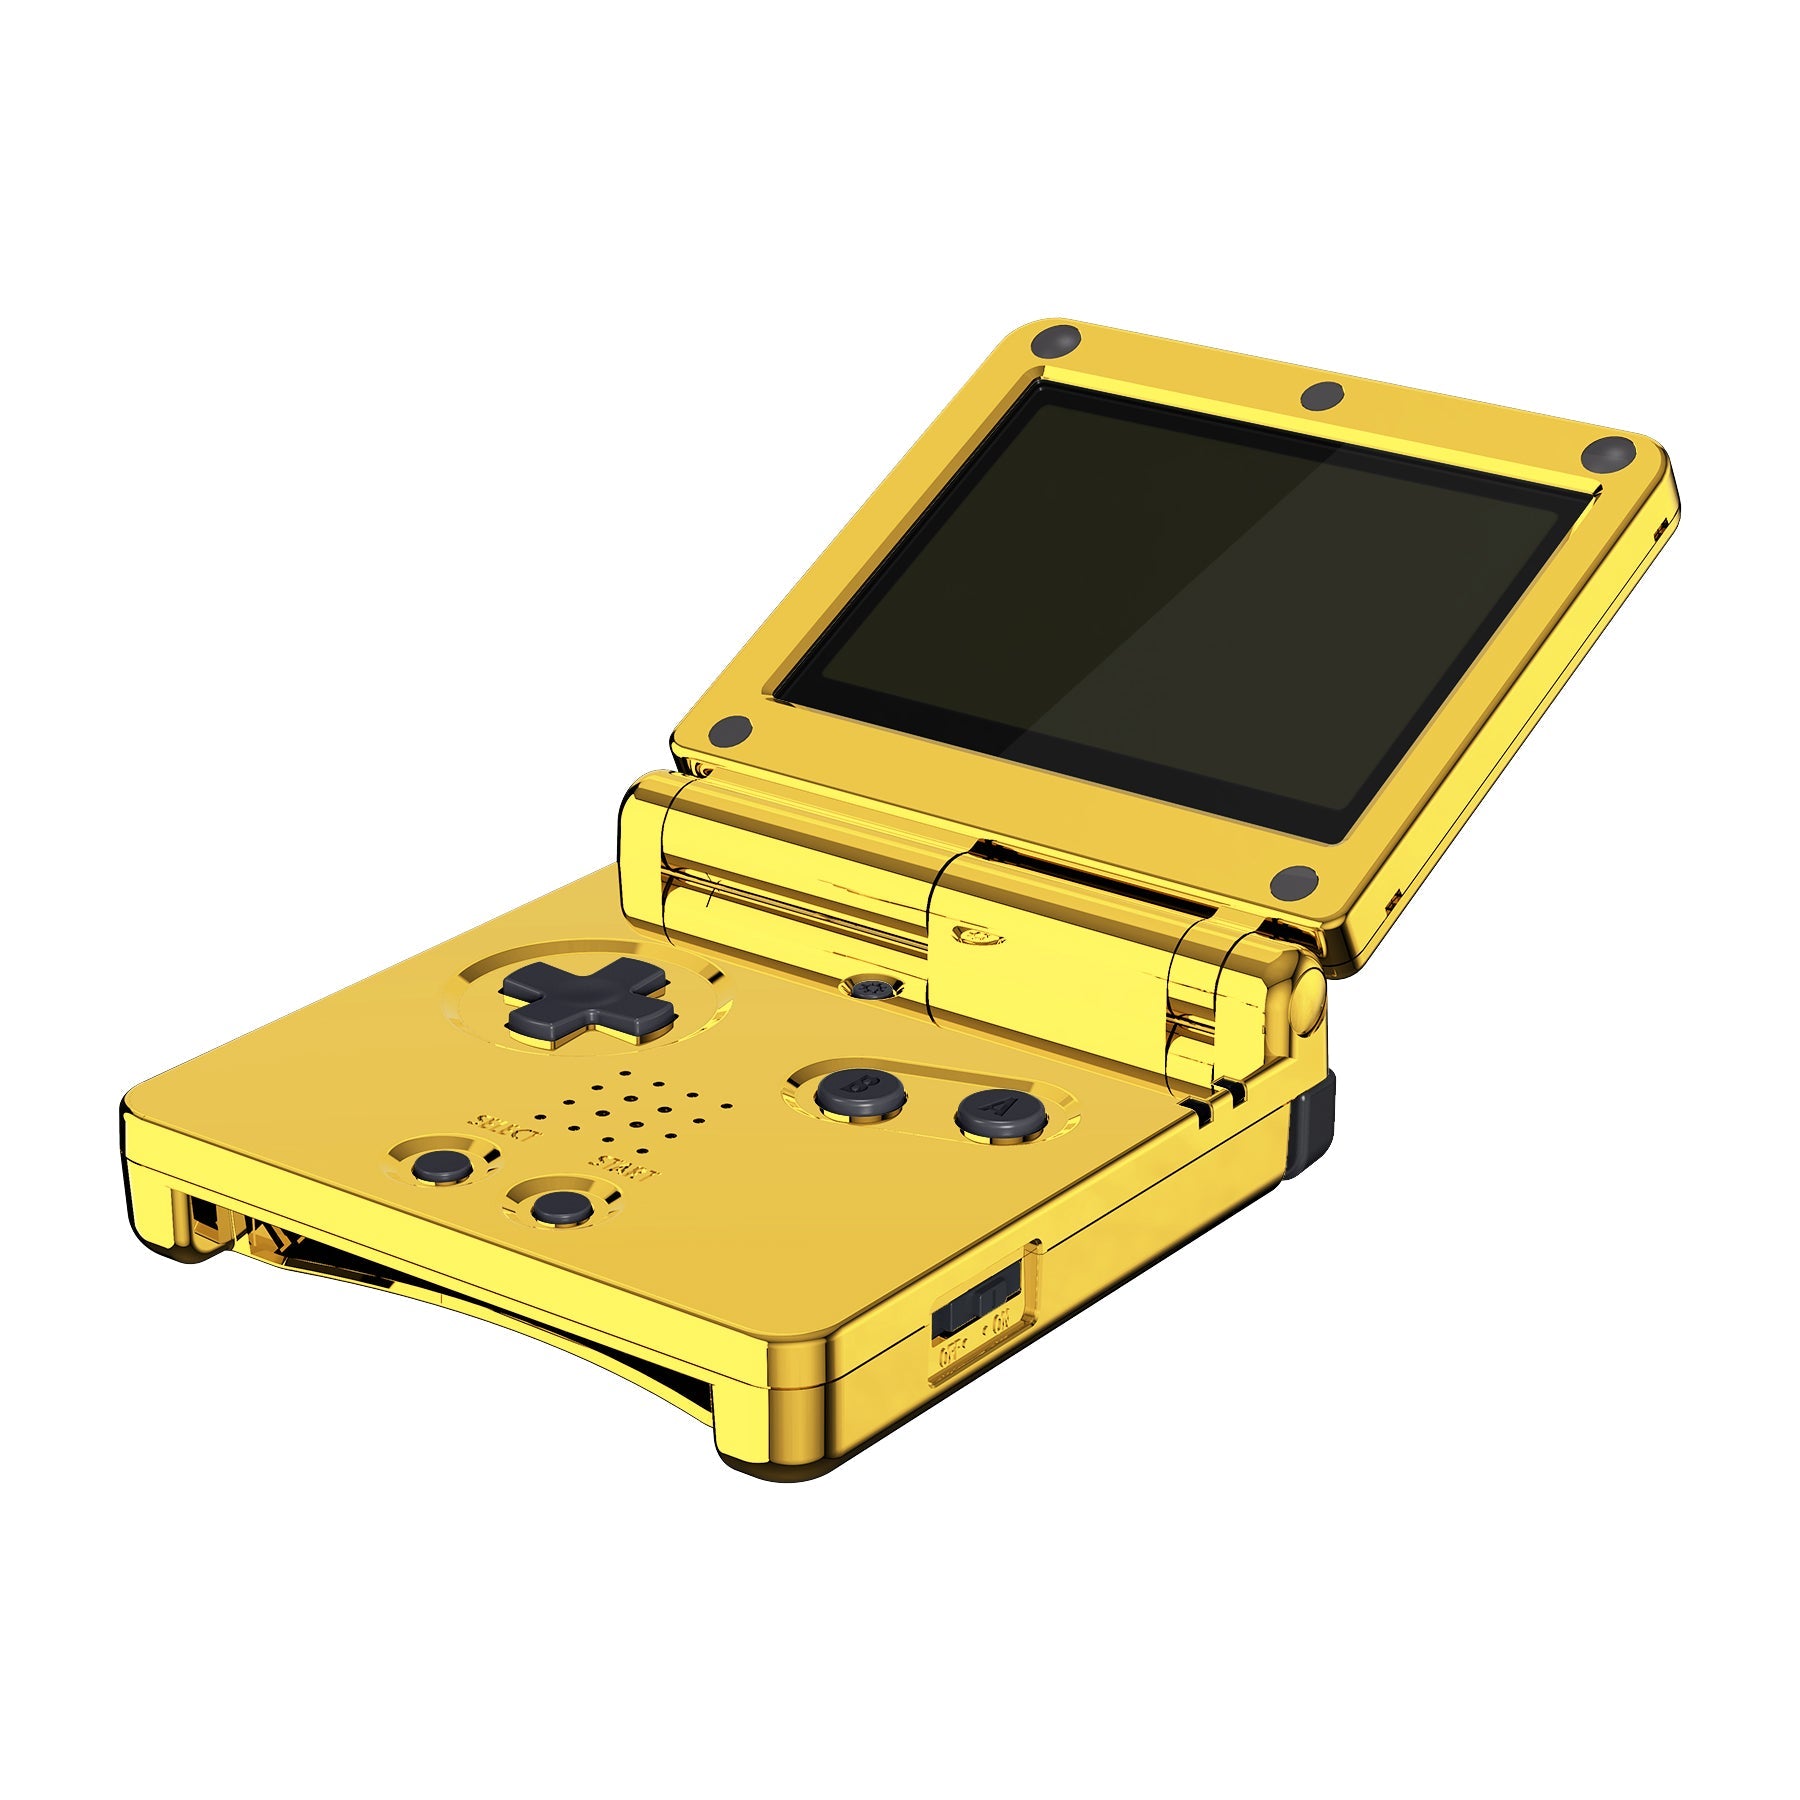 GBA SP Emulator Advance APK + Mod for Android.